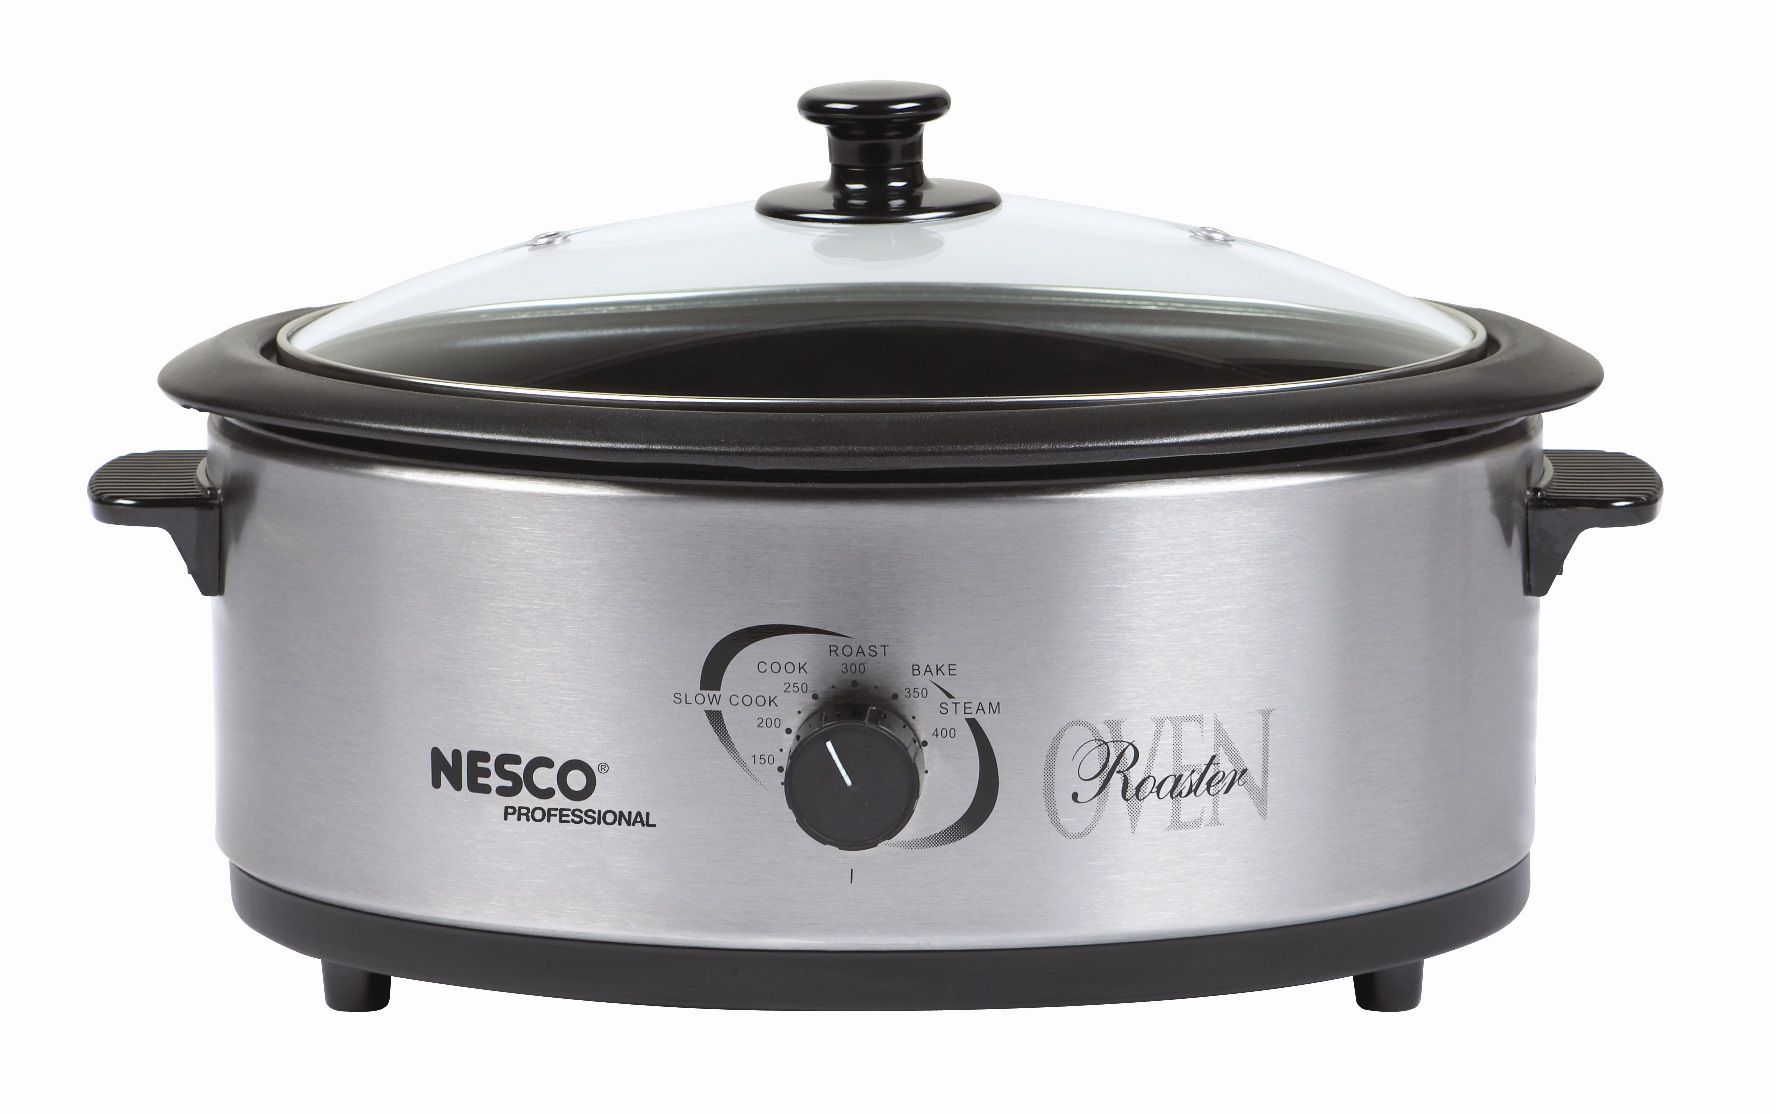 Nesco Professional 4816-25-30PR Stainless Steel 6 Quart Roaster Oven with Non-Stick Cookwell